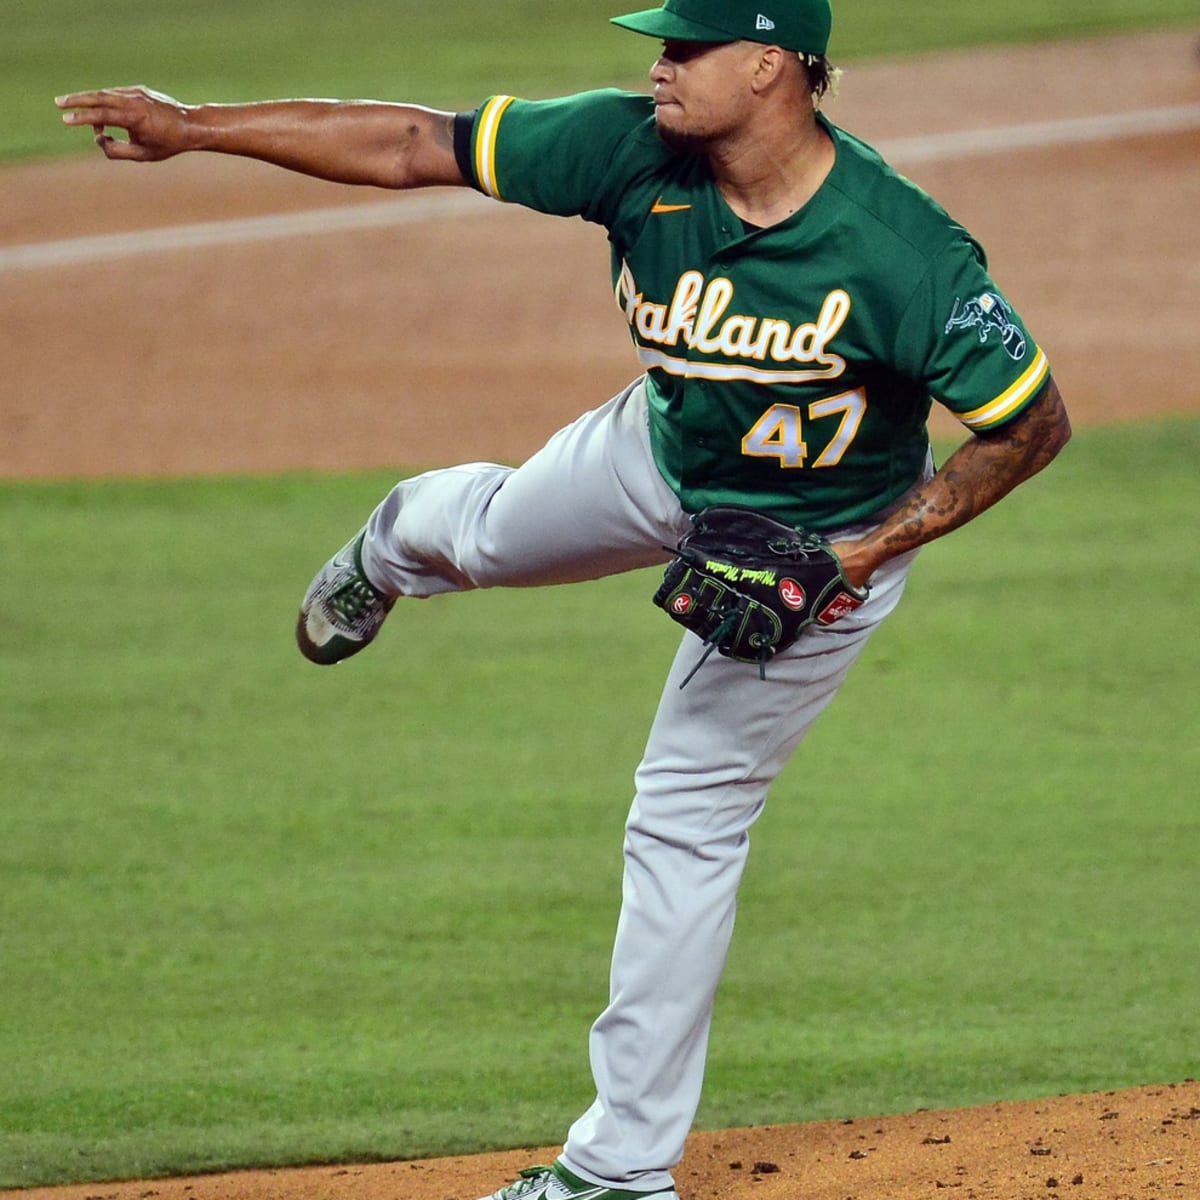 A's starter Frankie Montas named AL Player of the Week